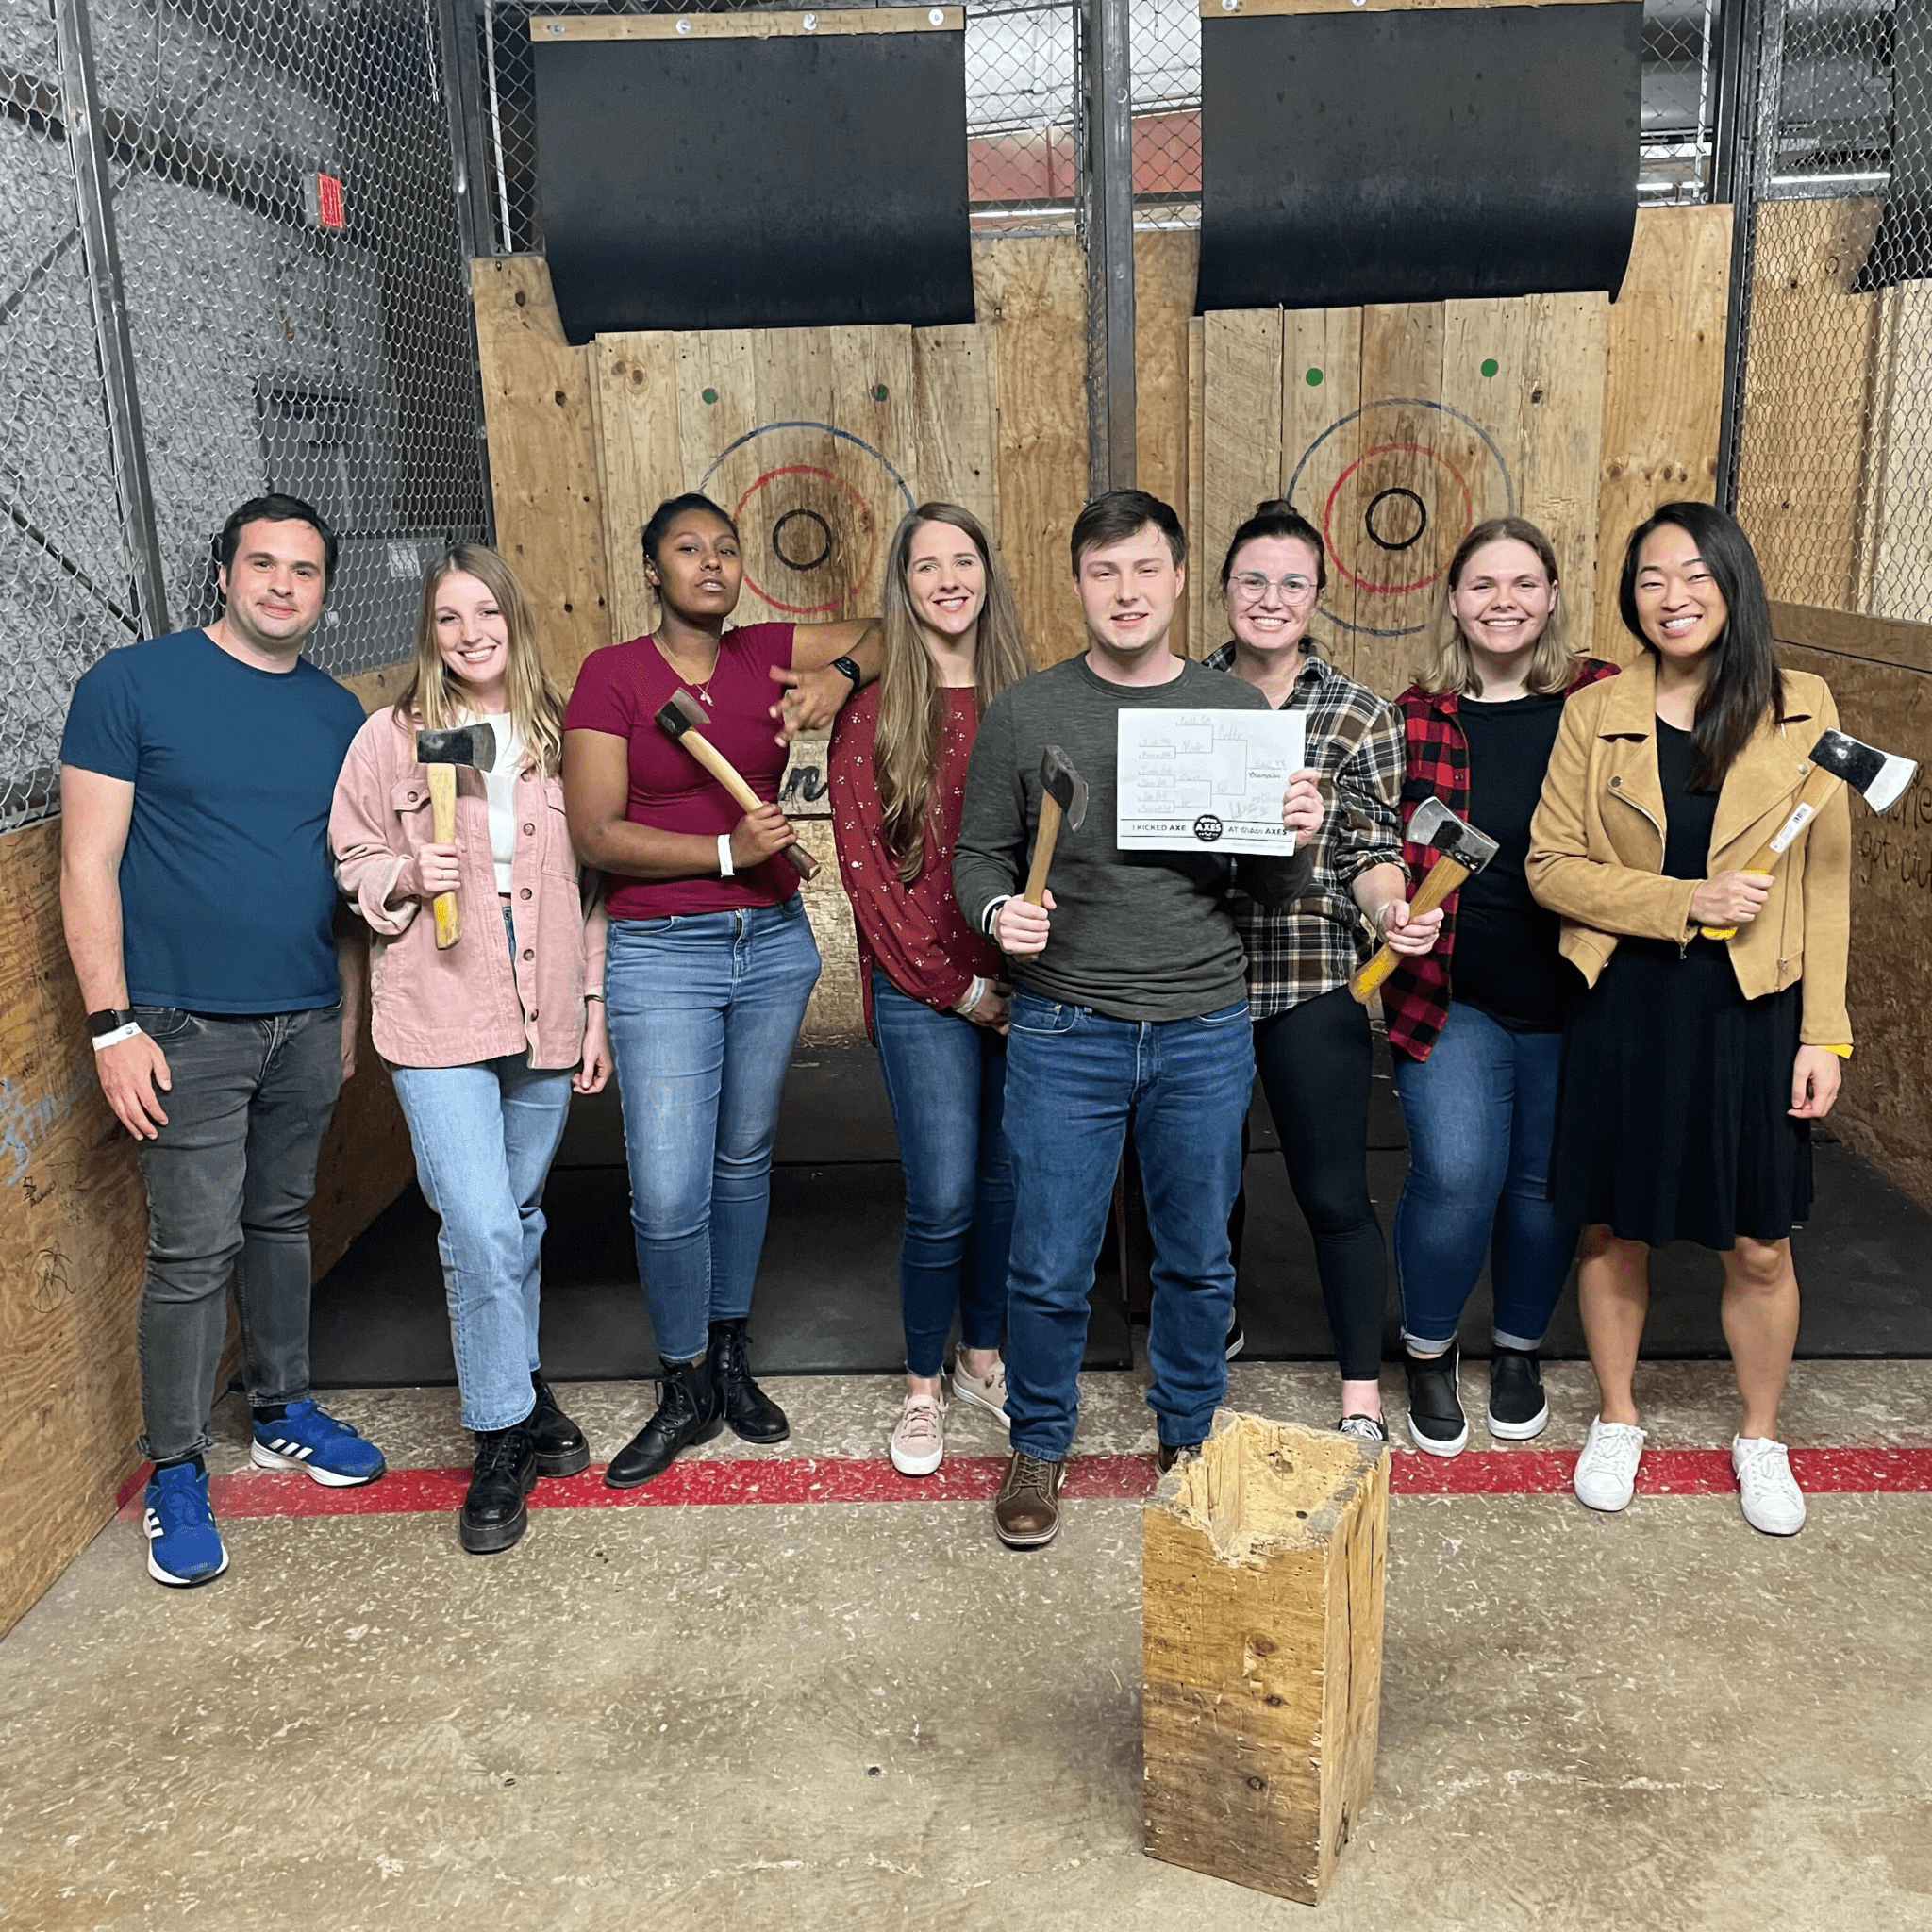 Imani and the rest of the CarbonBetter team at an axe throwing event.